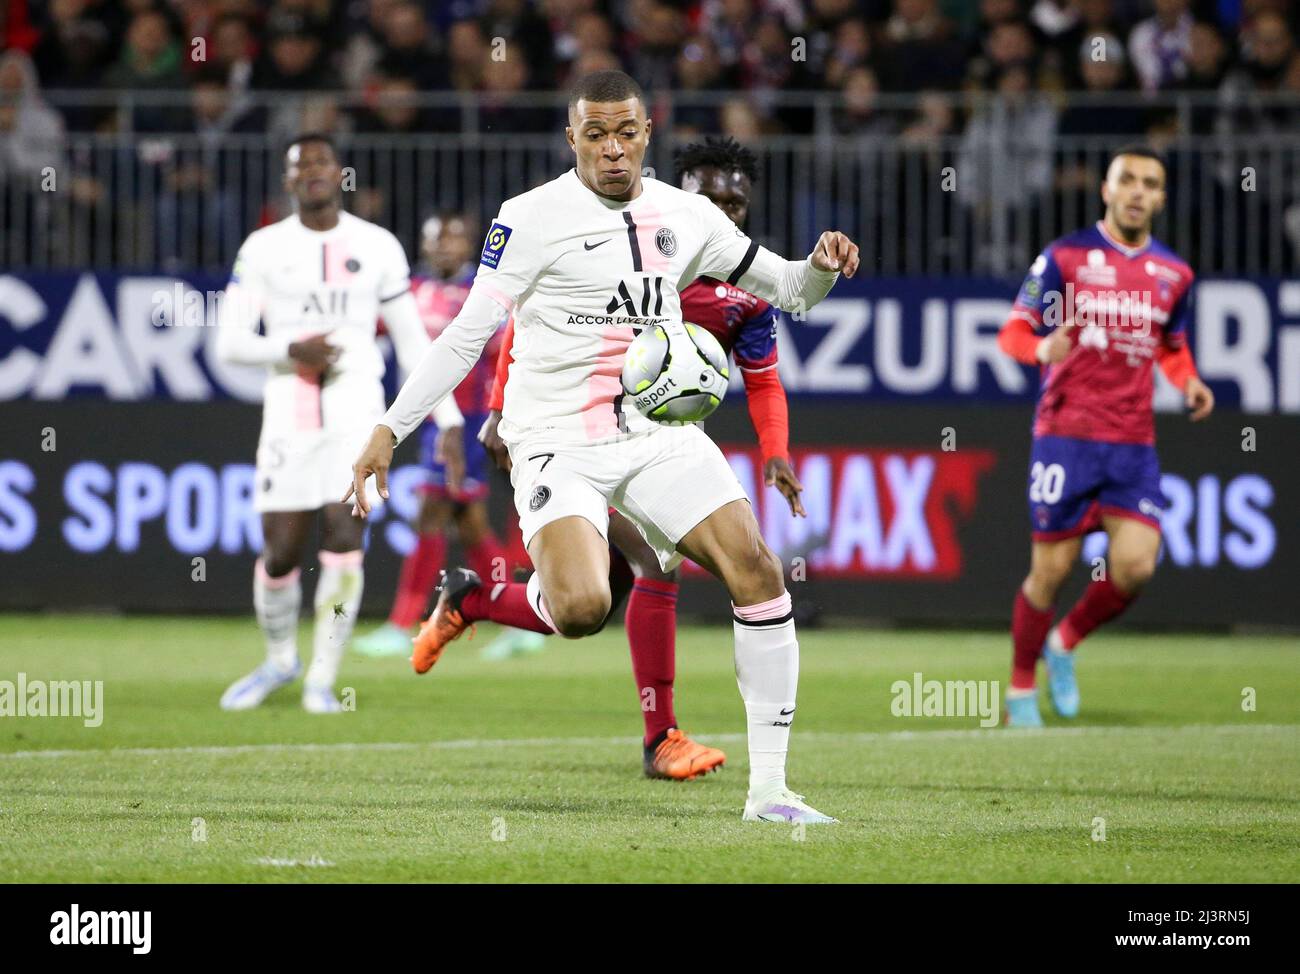 Clermont psg foot vs